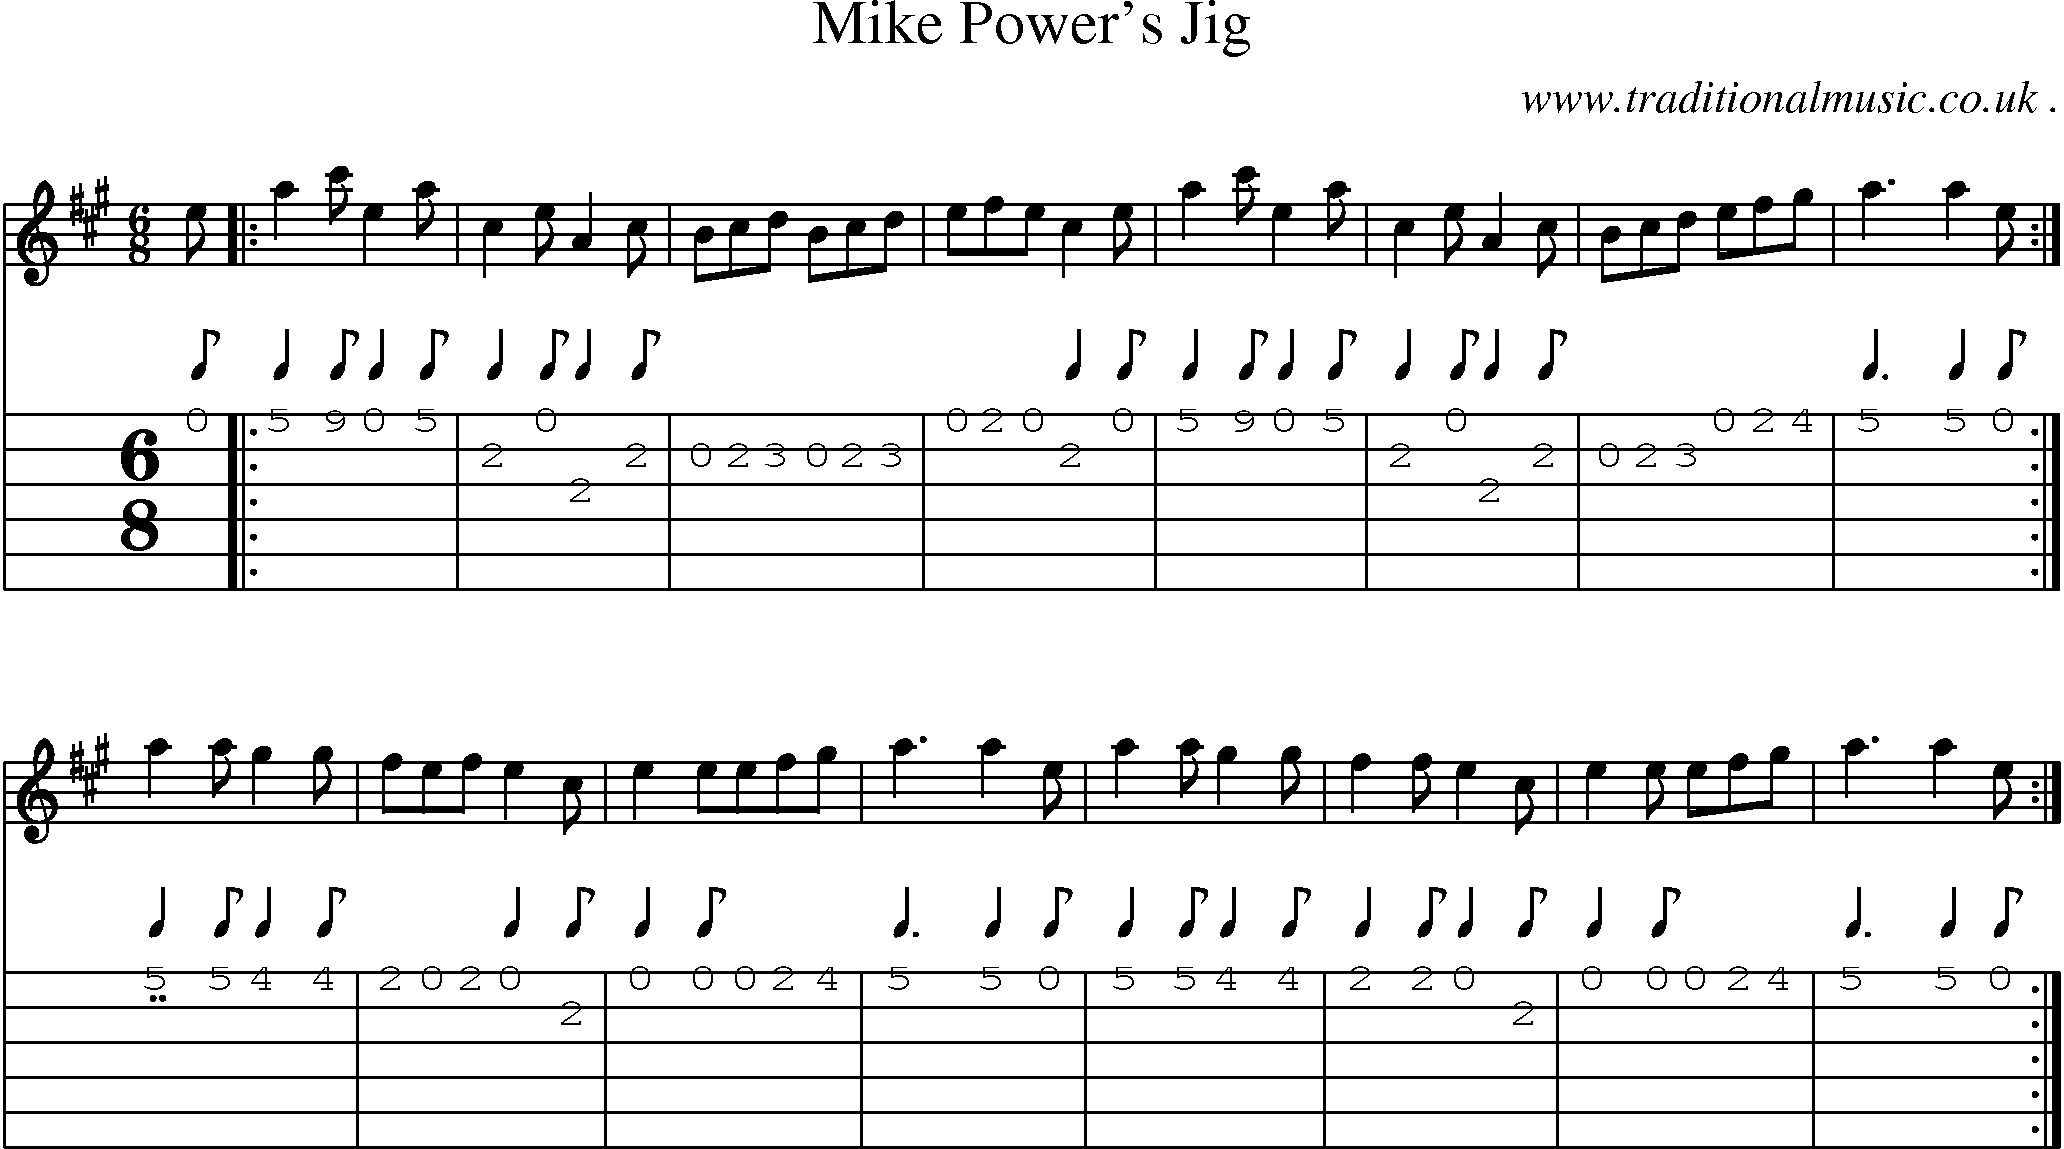 Sheet-music  score, Chords and Guitar Tabs for Mike Powers Jig